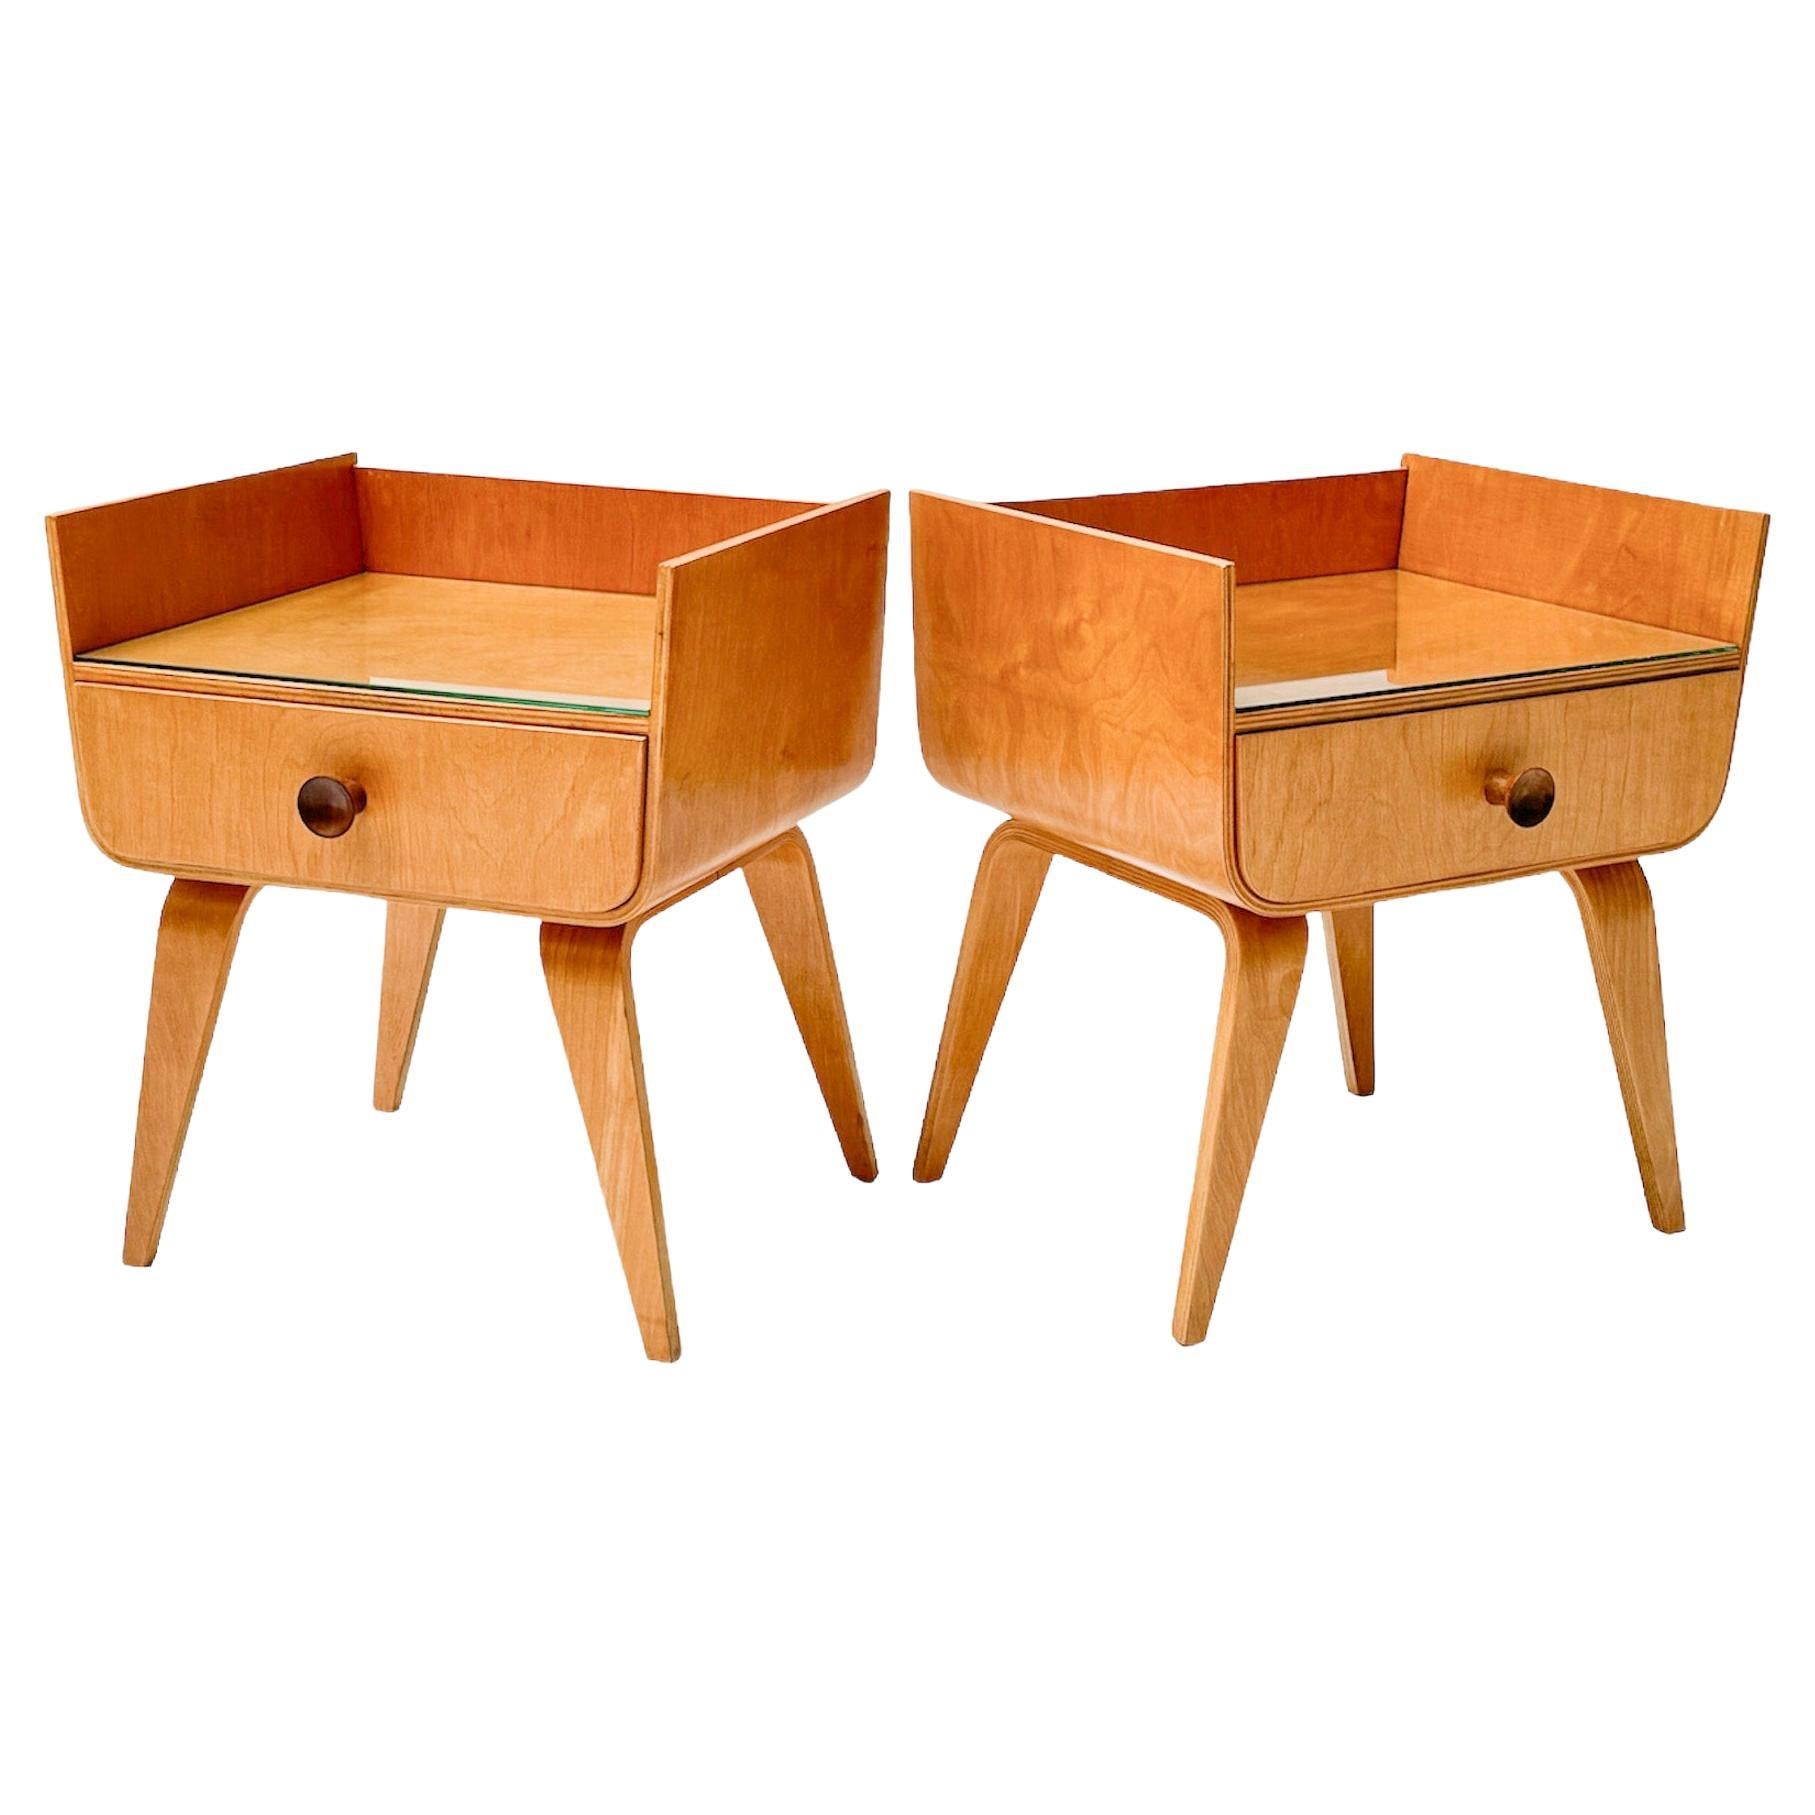  Birch Mid-Century Modern Nightstands or Bedside Tables by Cor Alons, 1949